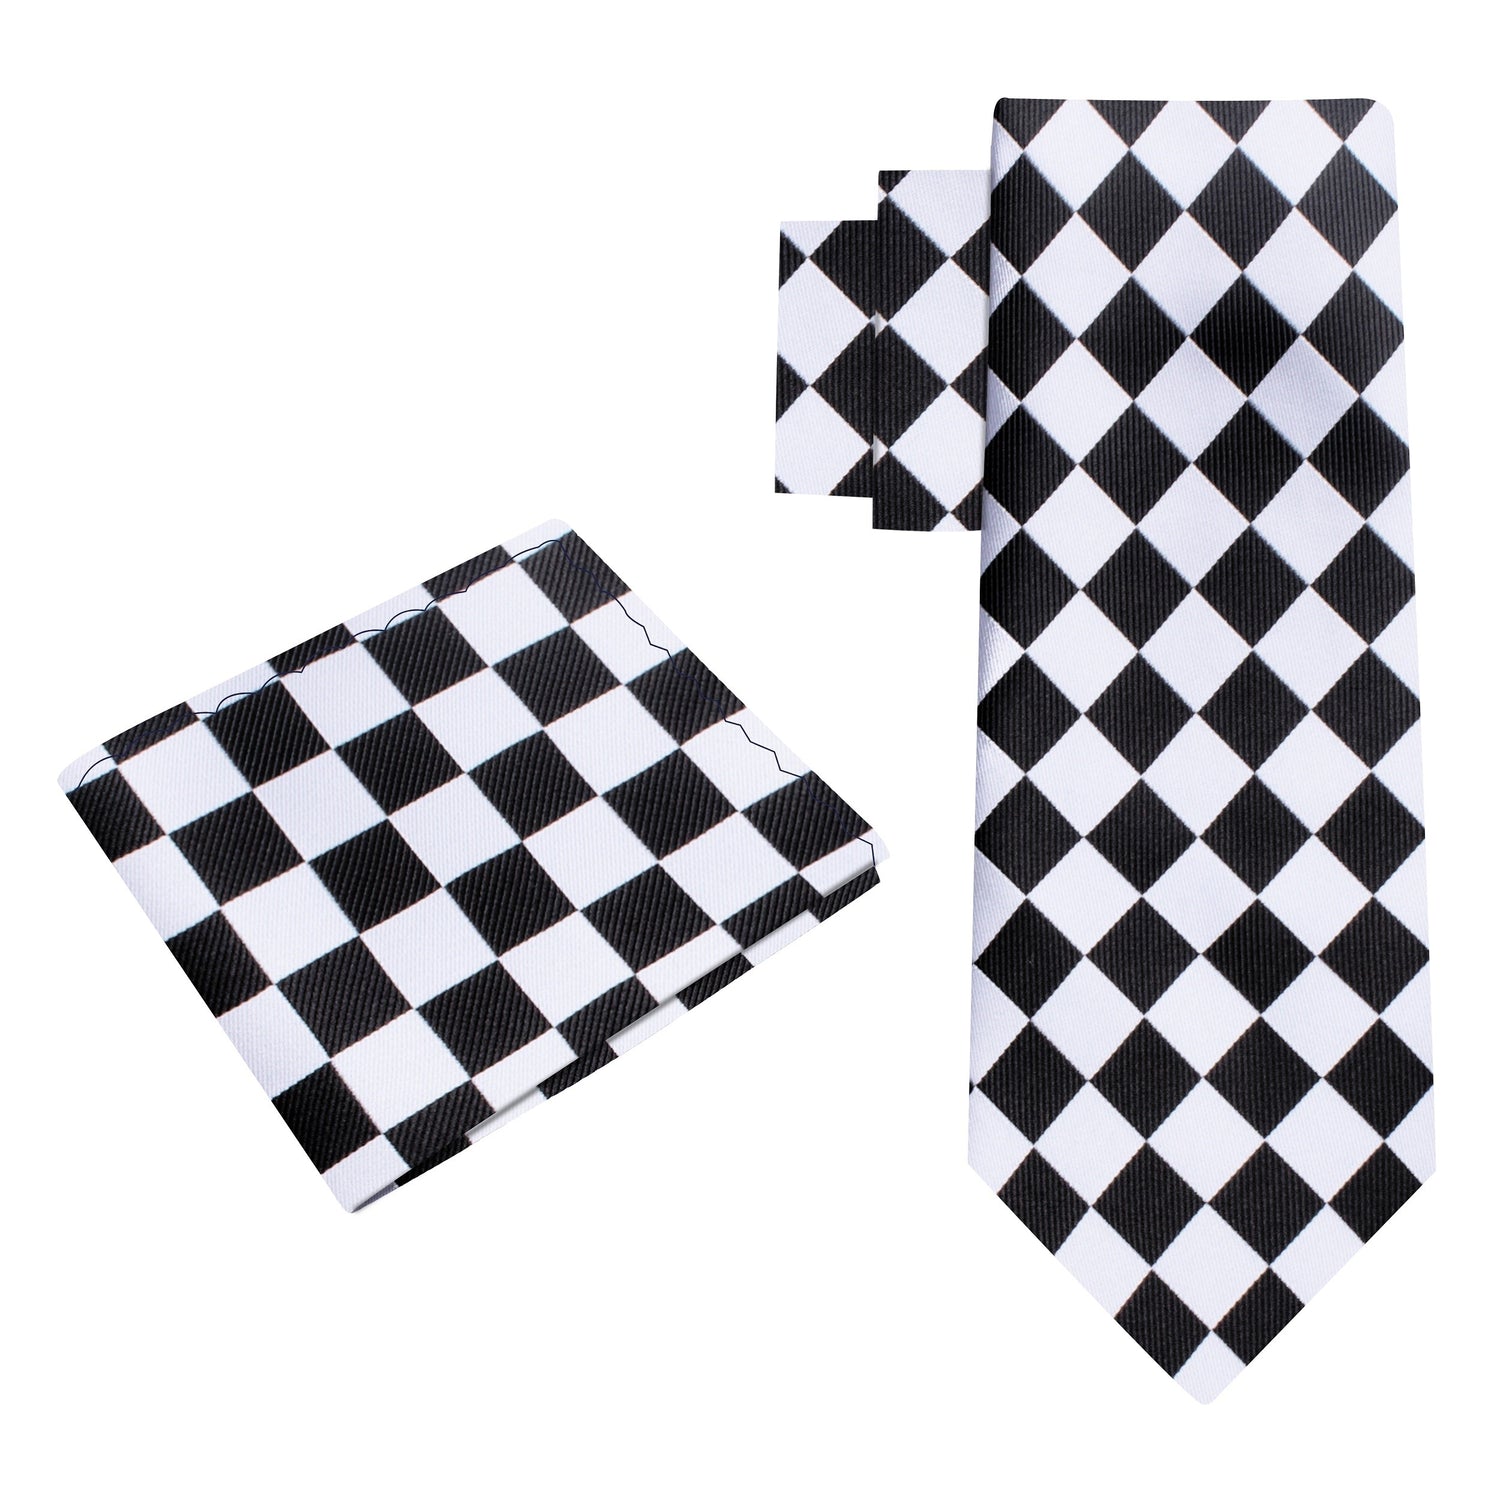 Alt View: Light Grey and Black Checkerboard Tie and Matching Square